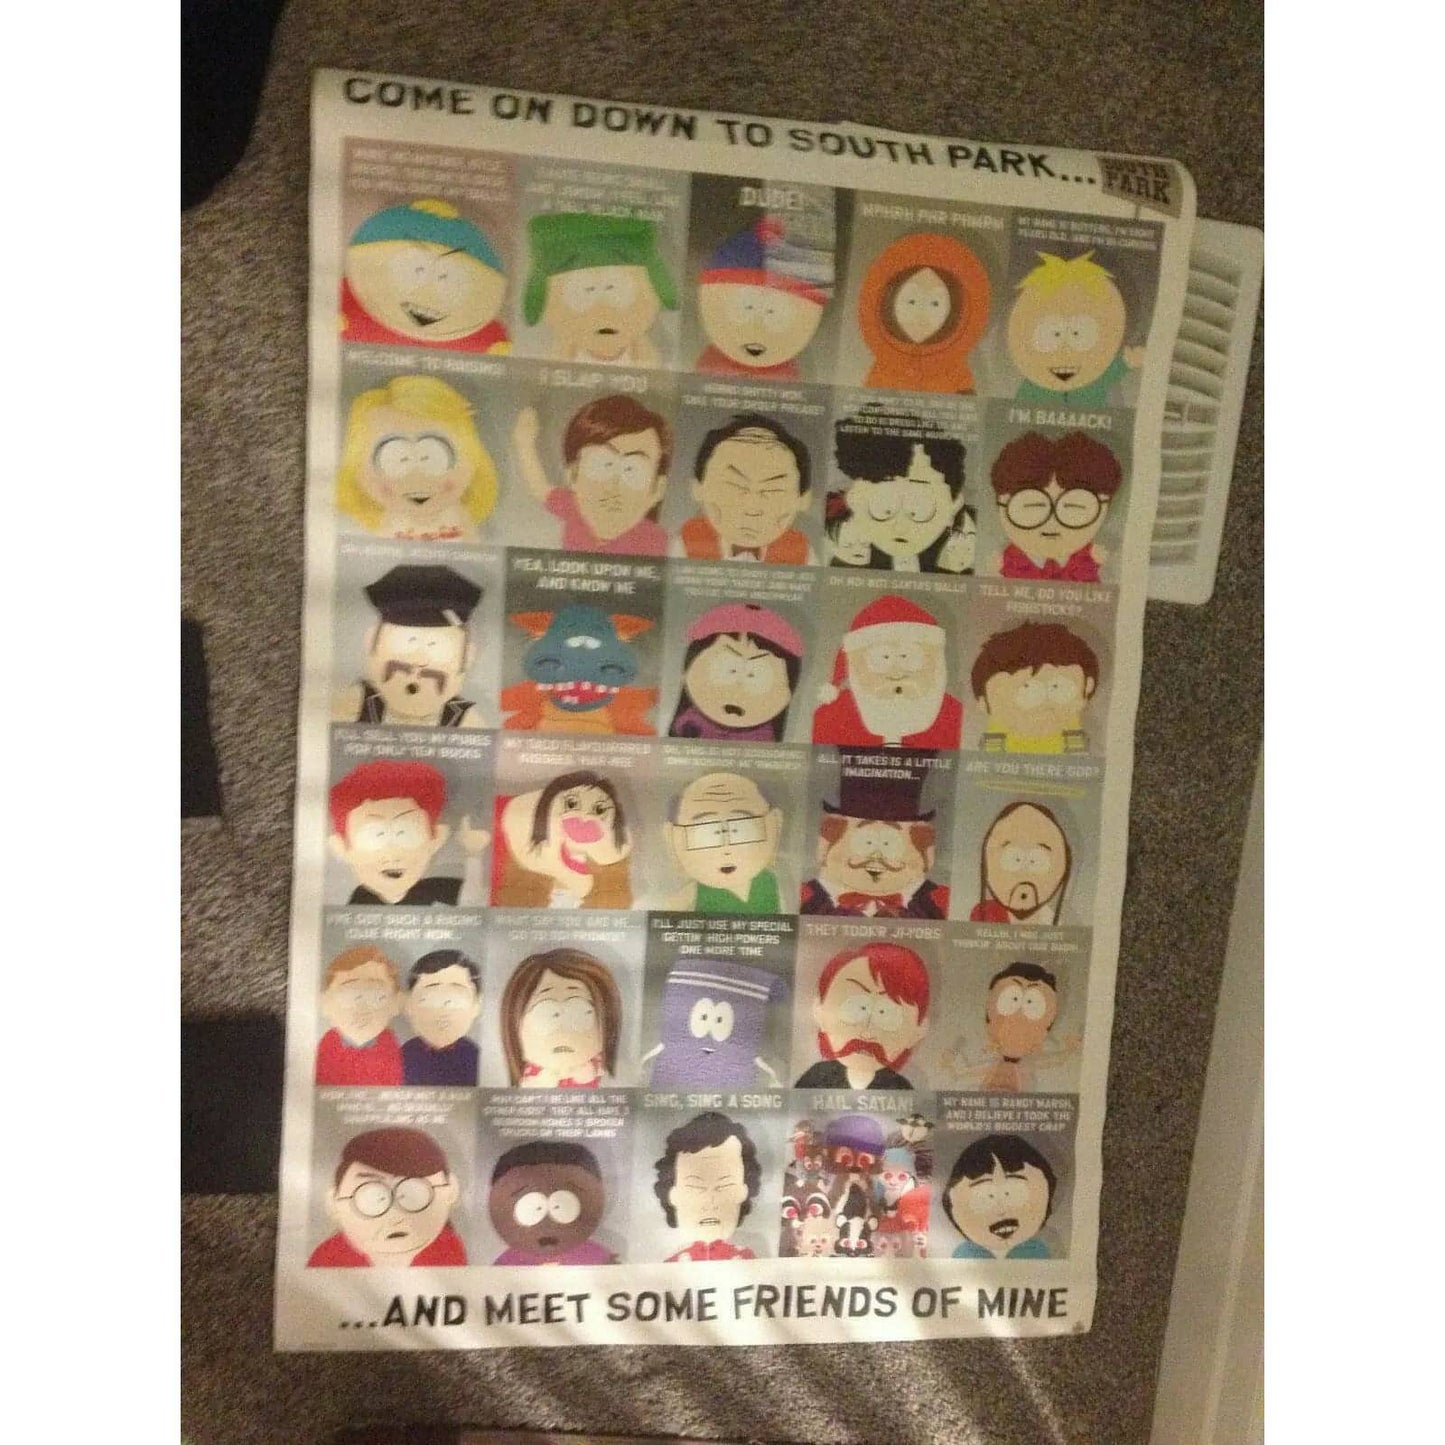 South Park - Meet Friends of Mine [Poster] BooksCardsNBikes